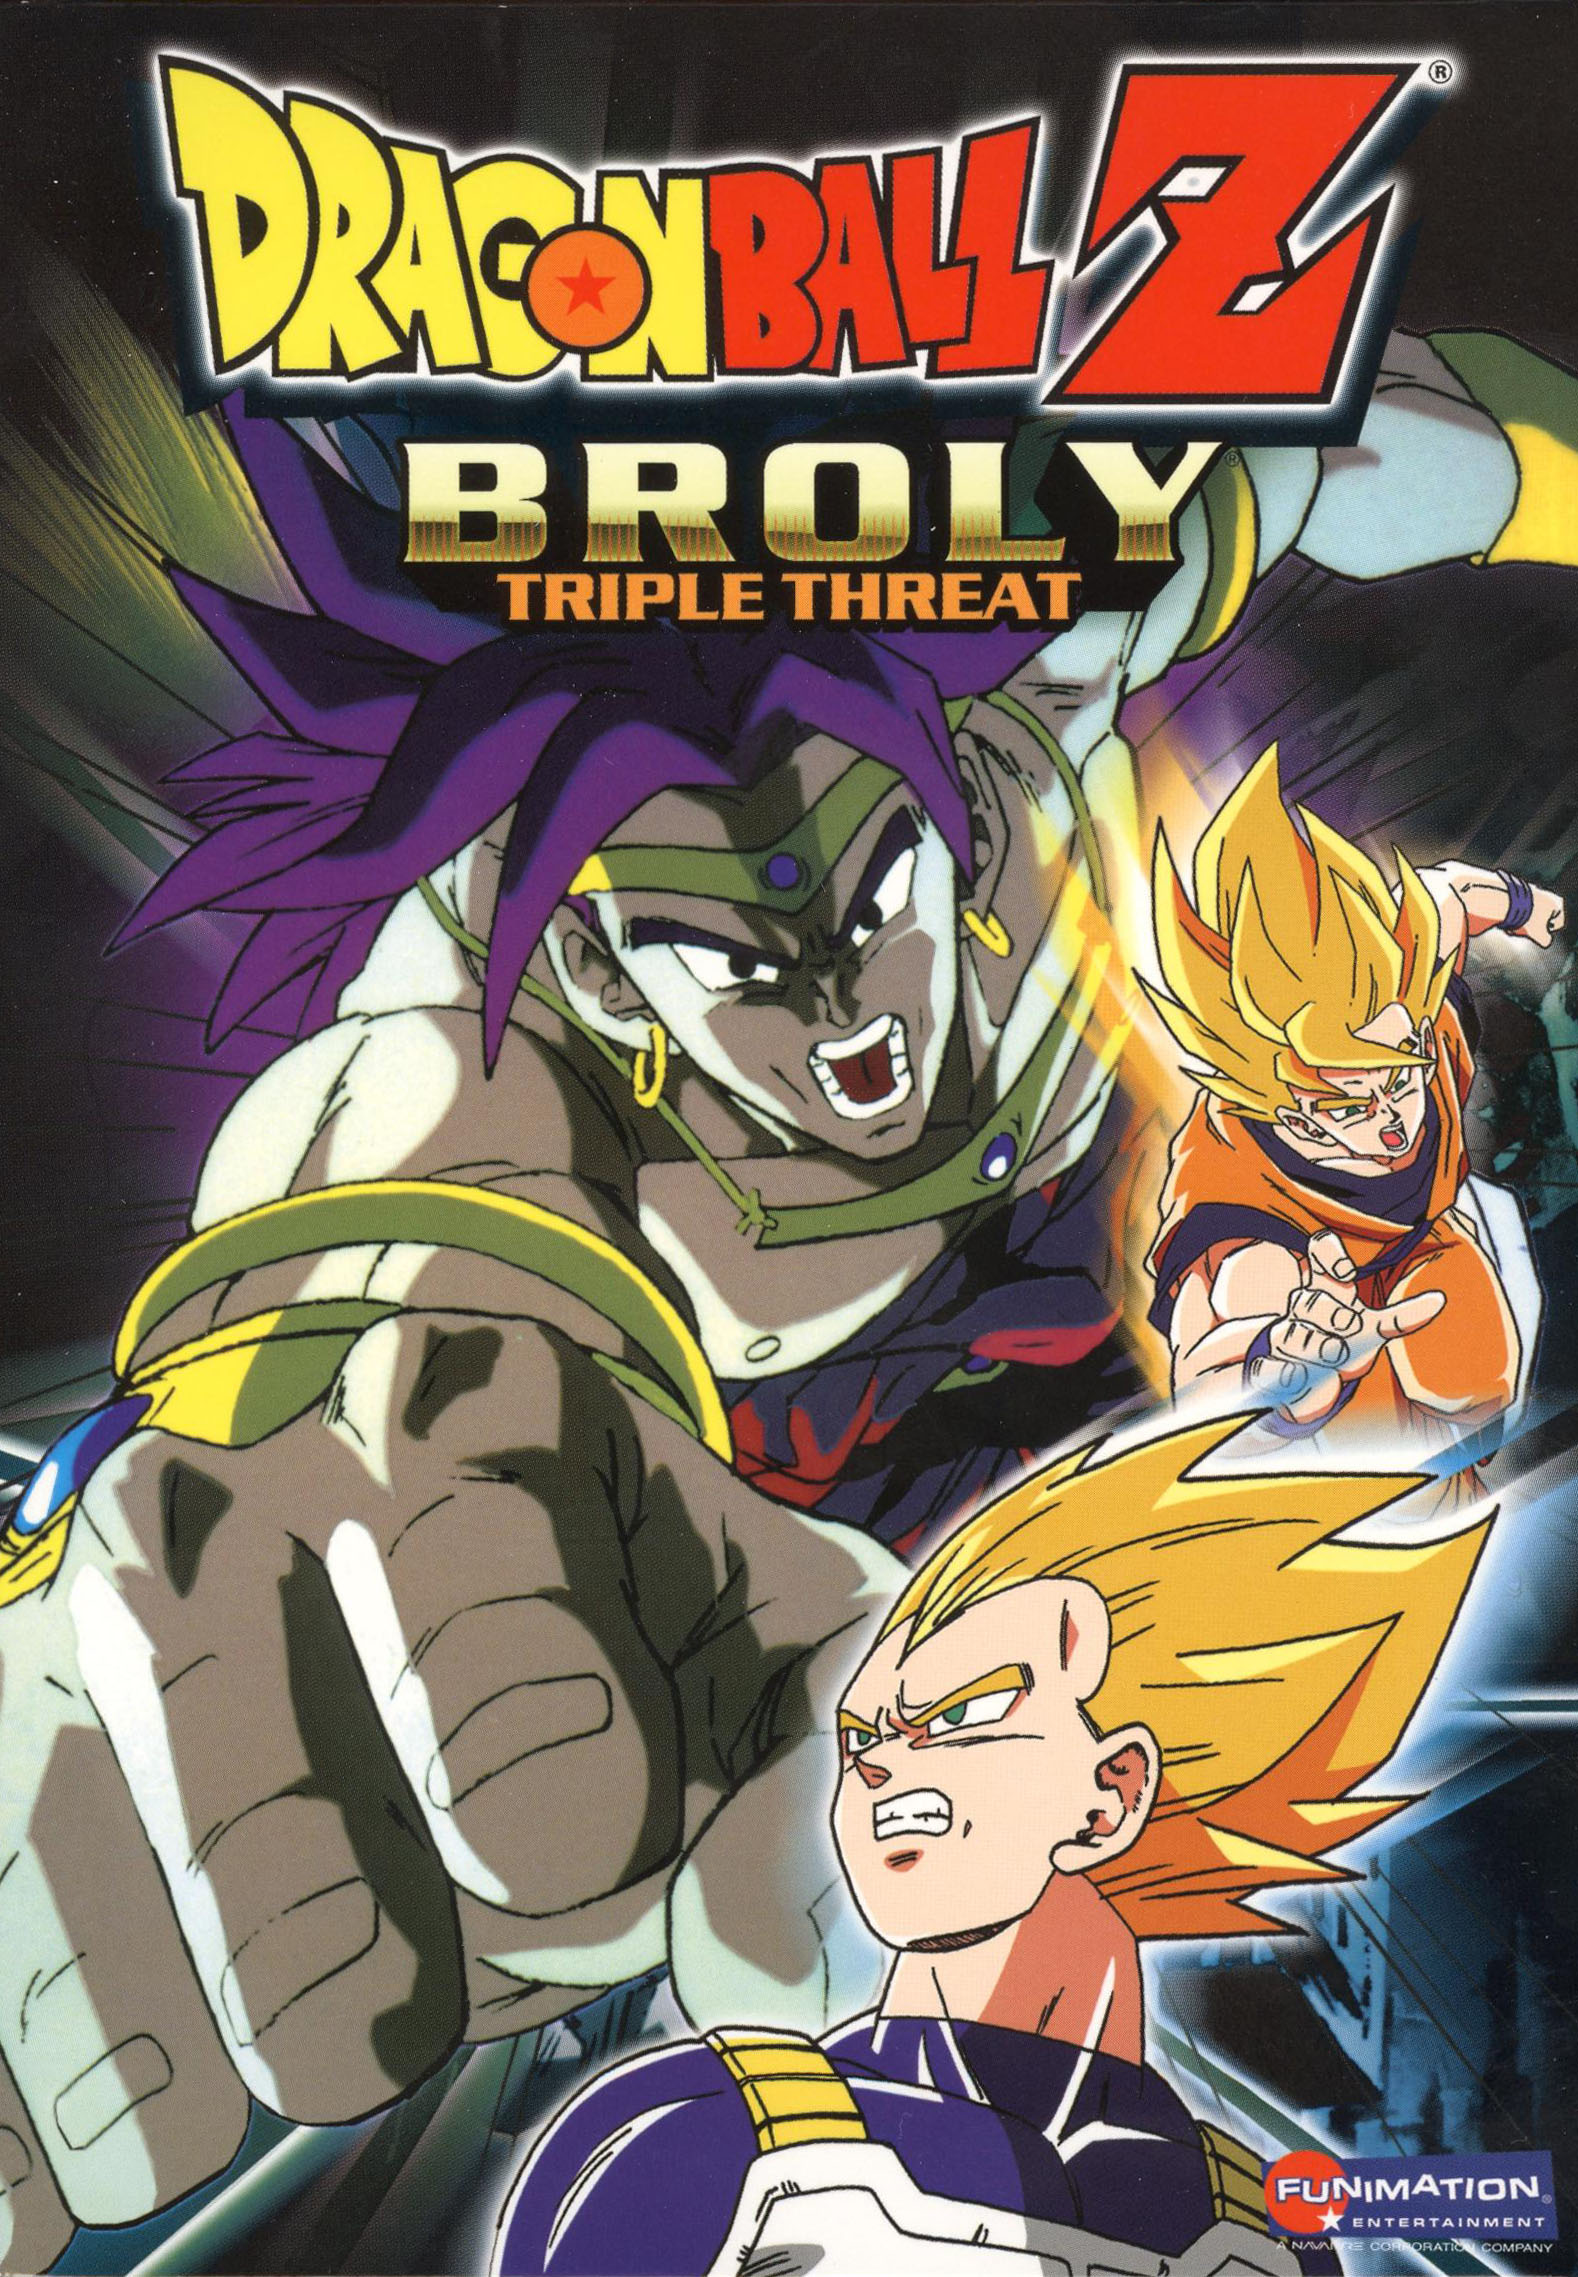 Dragon Ball Super: Broly - The Movie (dvd) : Target